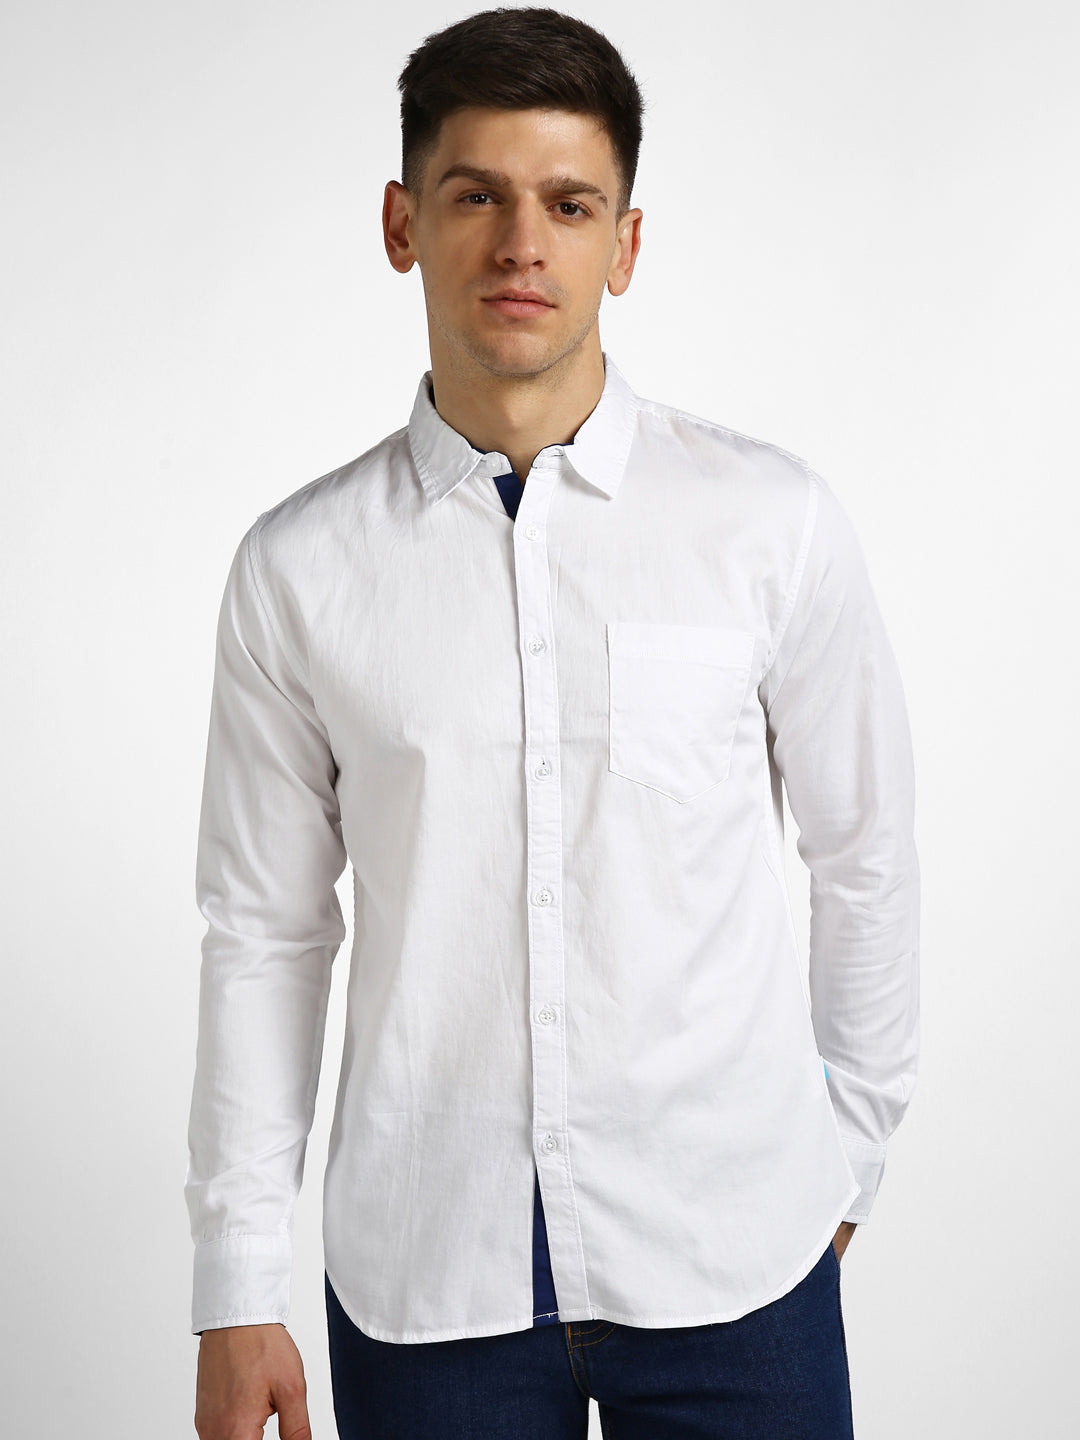 Men's White Cotton Full Sleeve Slim Fit Casual Solid Shirt